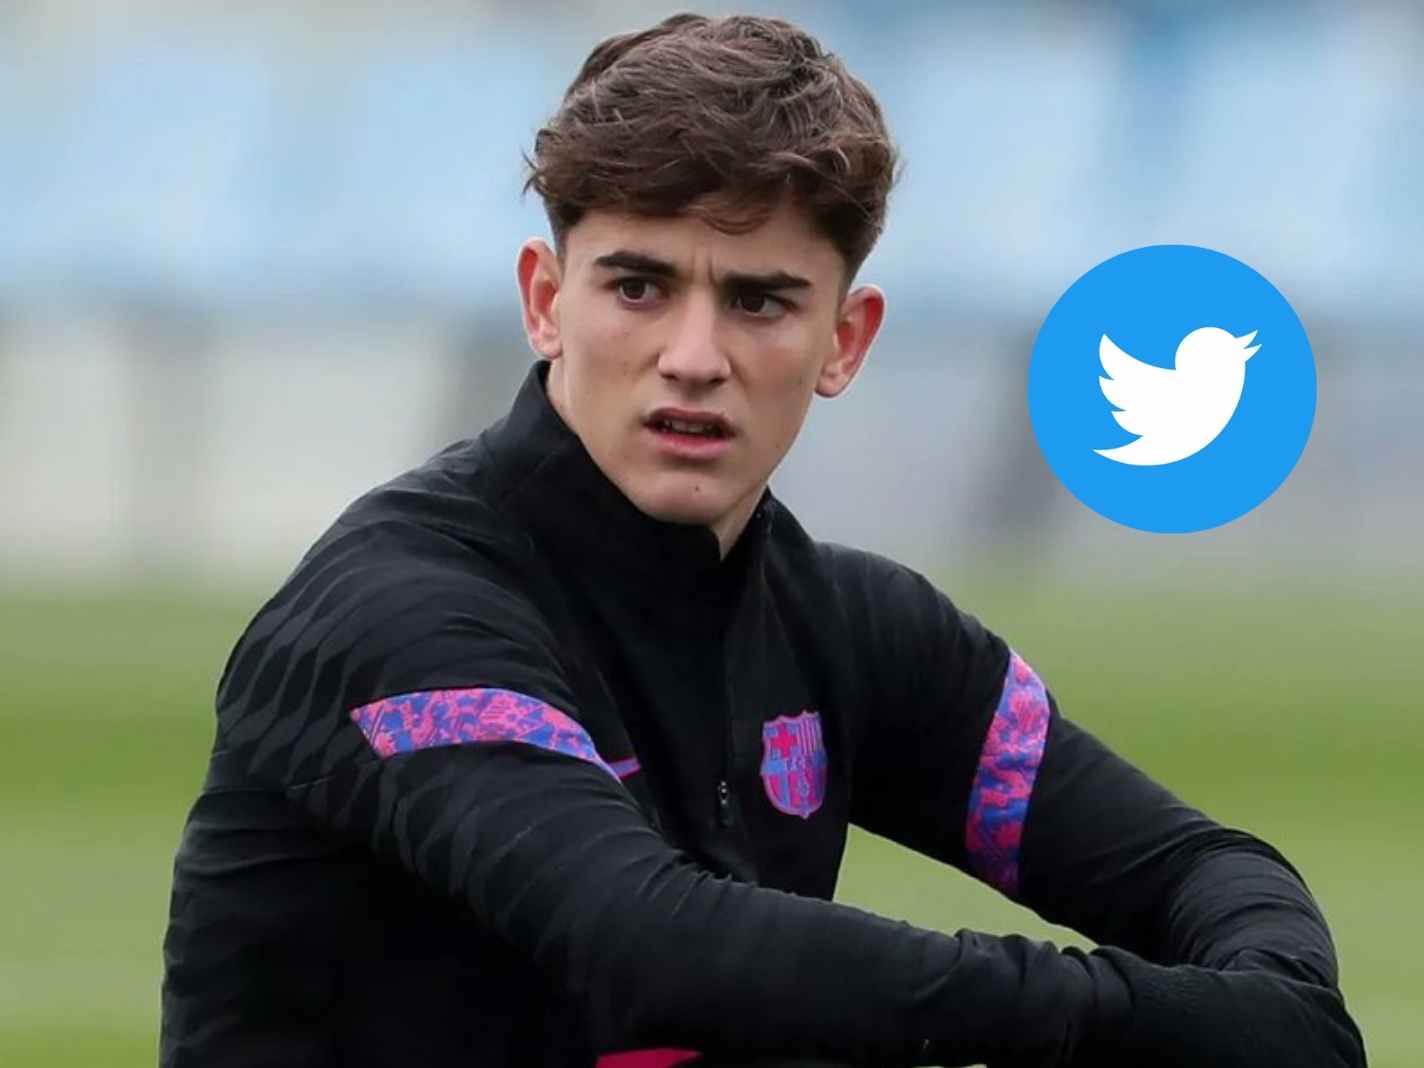 The reason why Barcelona fans suspect Gavi has a burner account on Twitter